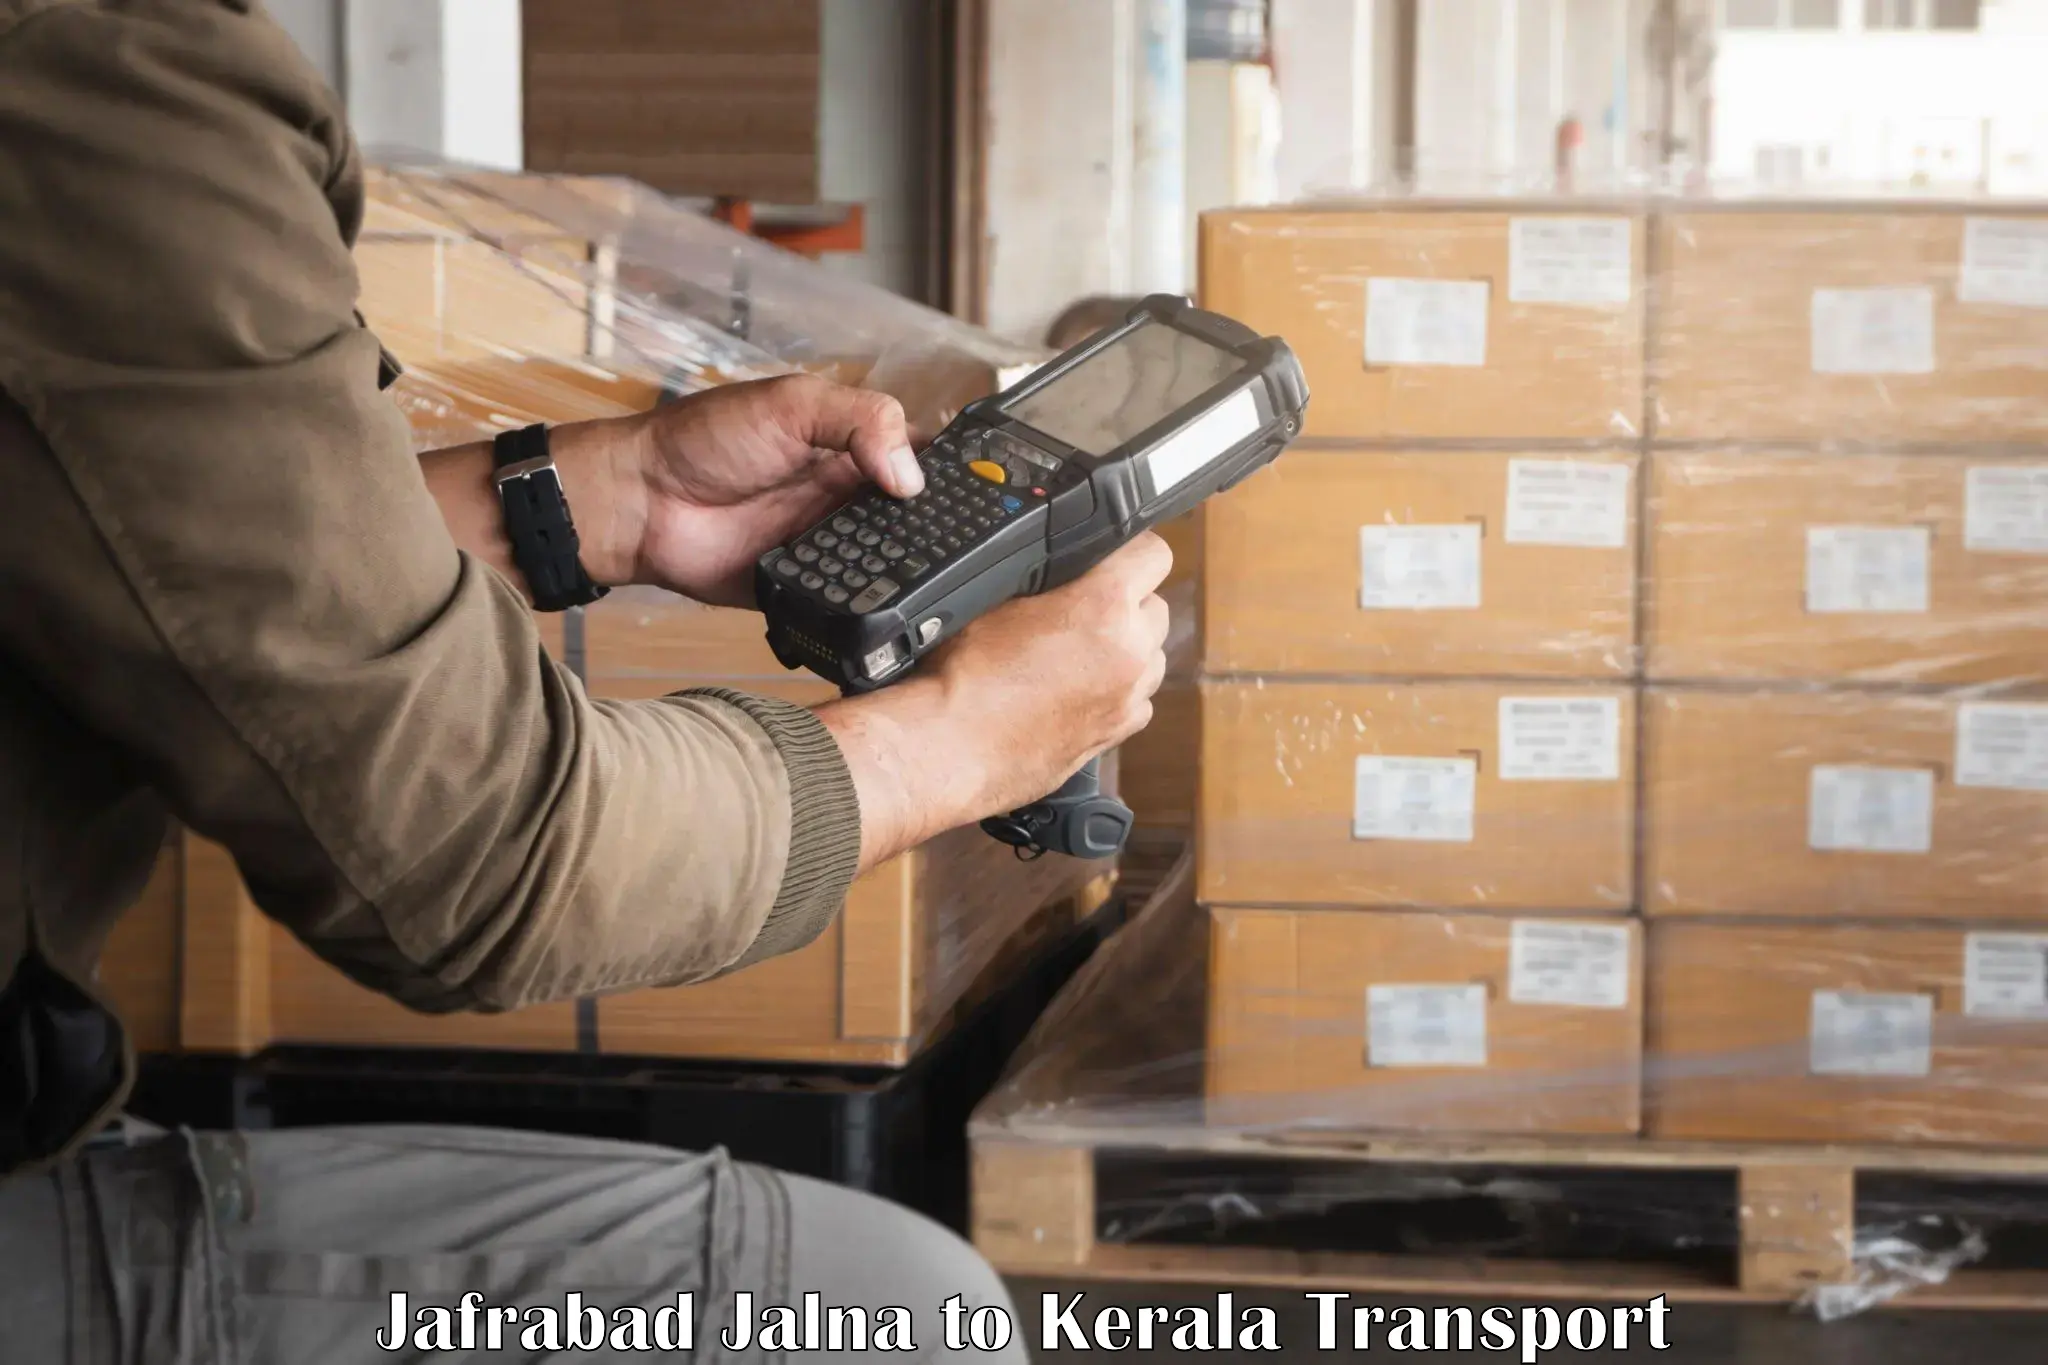 Container transportation services Jafrabad Jalna to Kerala